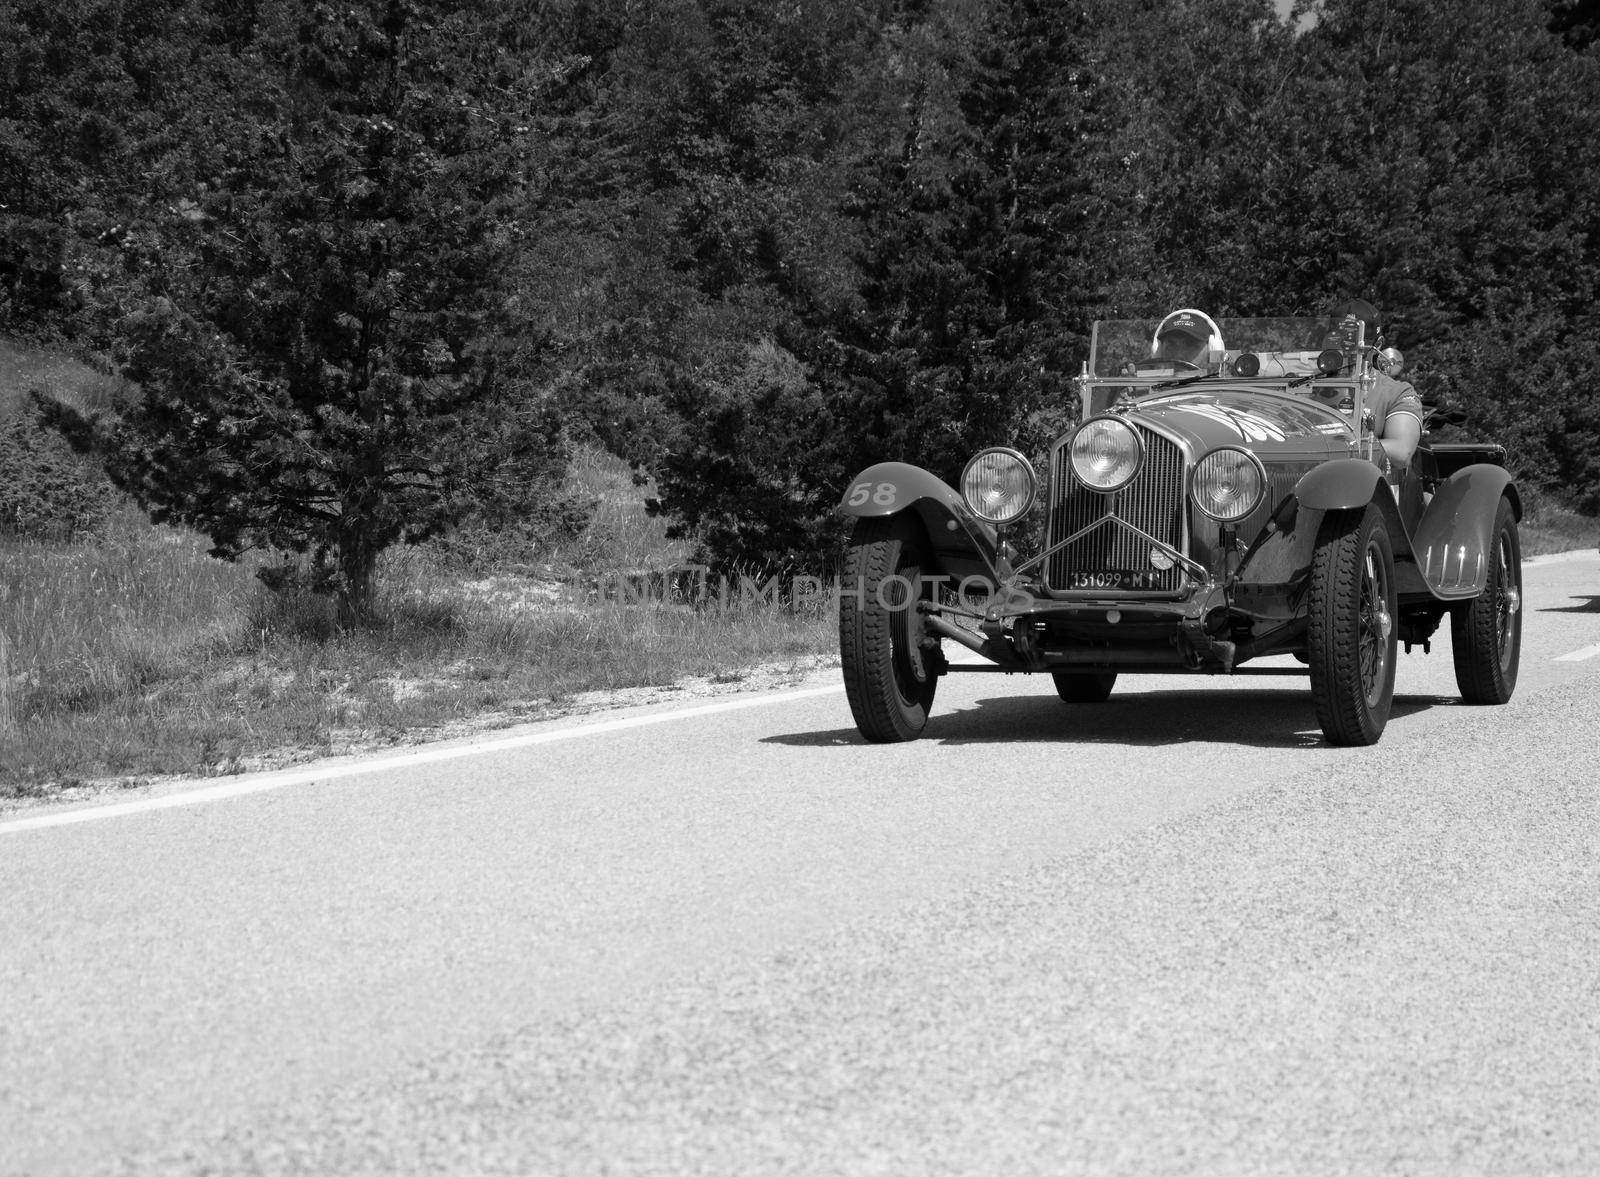 ALFA ROMEO 6C 1500 SUPER SPORT 1929 on an old racing car in rally Mille Miglia 2022 the famous italian historical race (1927-1957 by massimocampanari